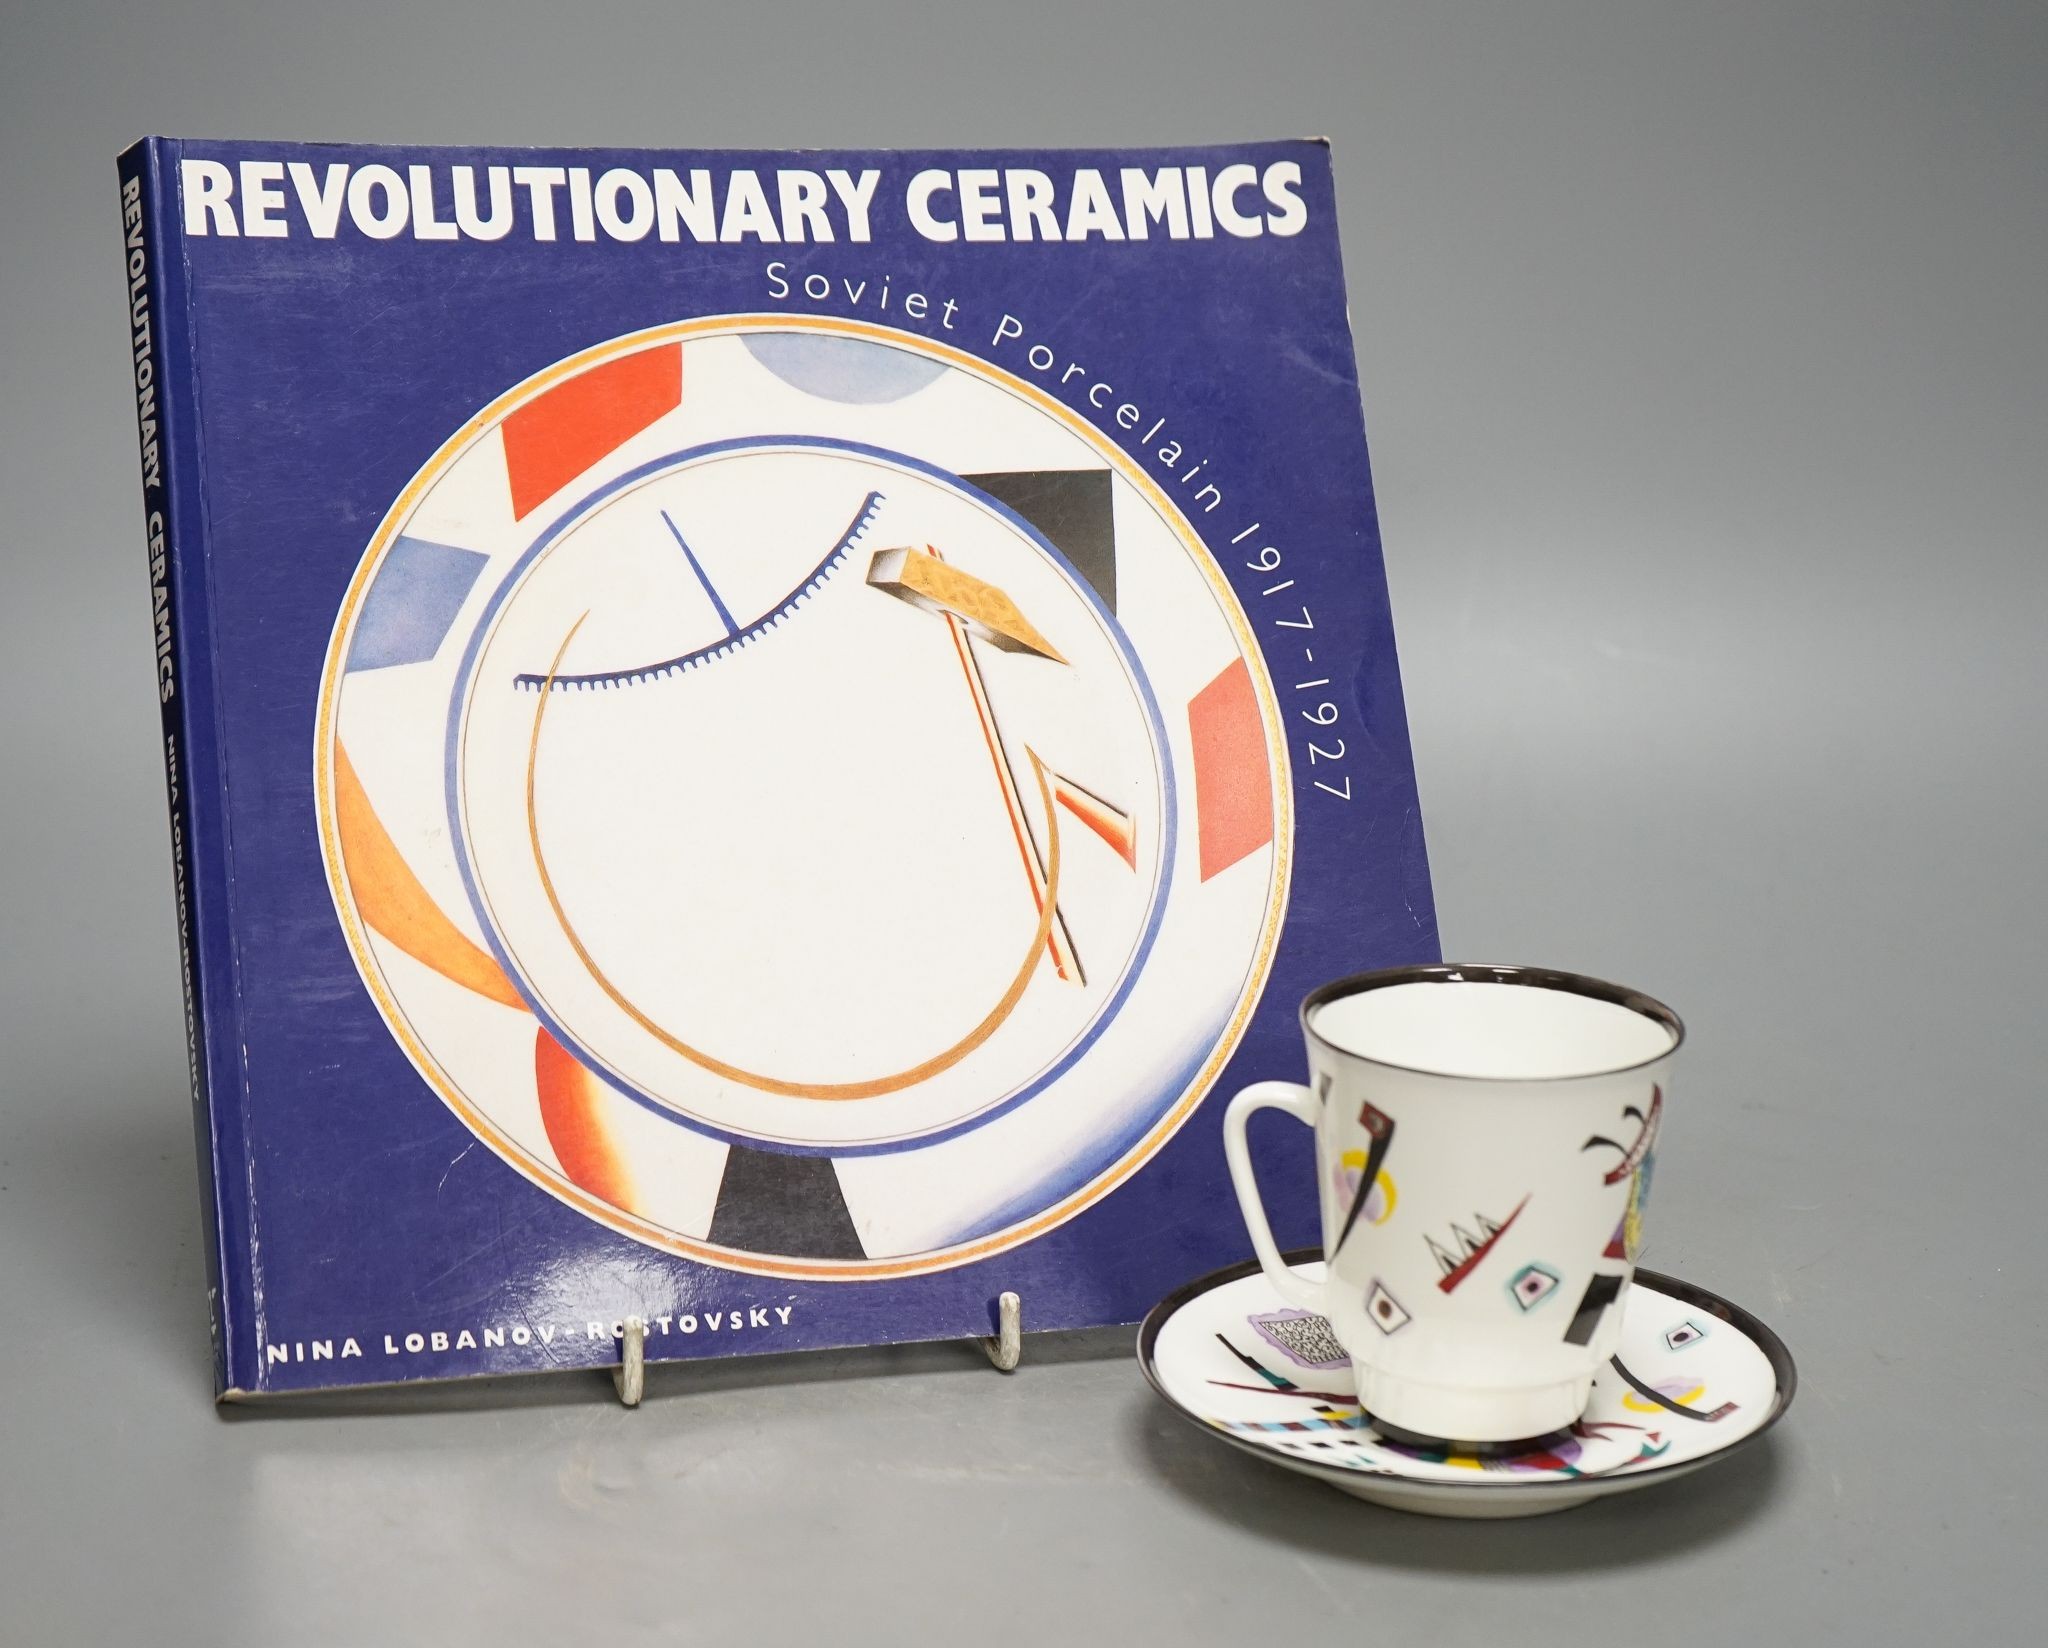 Russian Suprematist-style coffee cup and saucer, 20th century, together with a volume of Revolutionary Ceramics by Nina Lobanov-Rostovsky